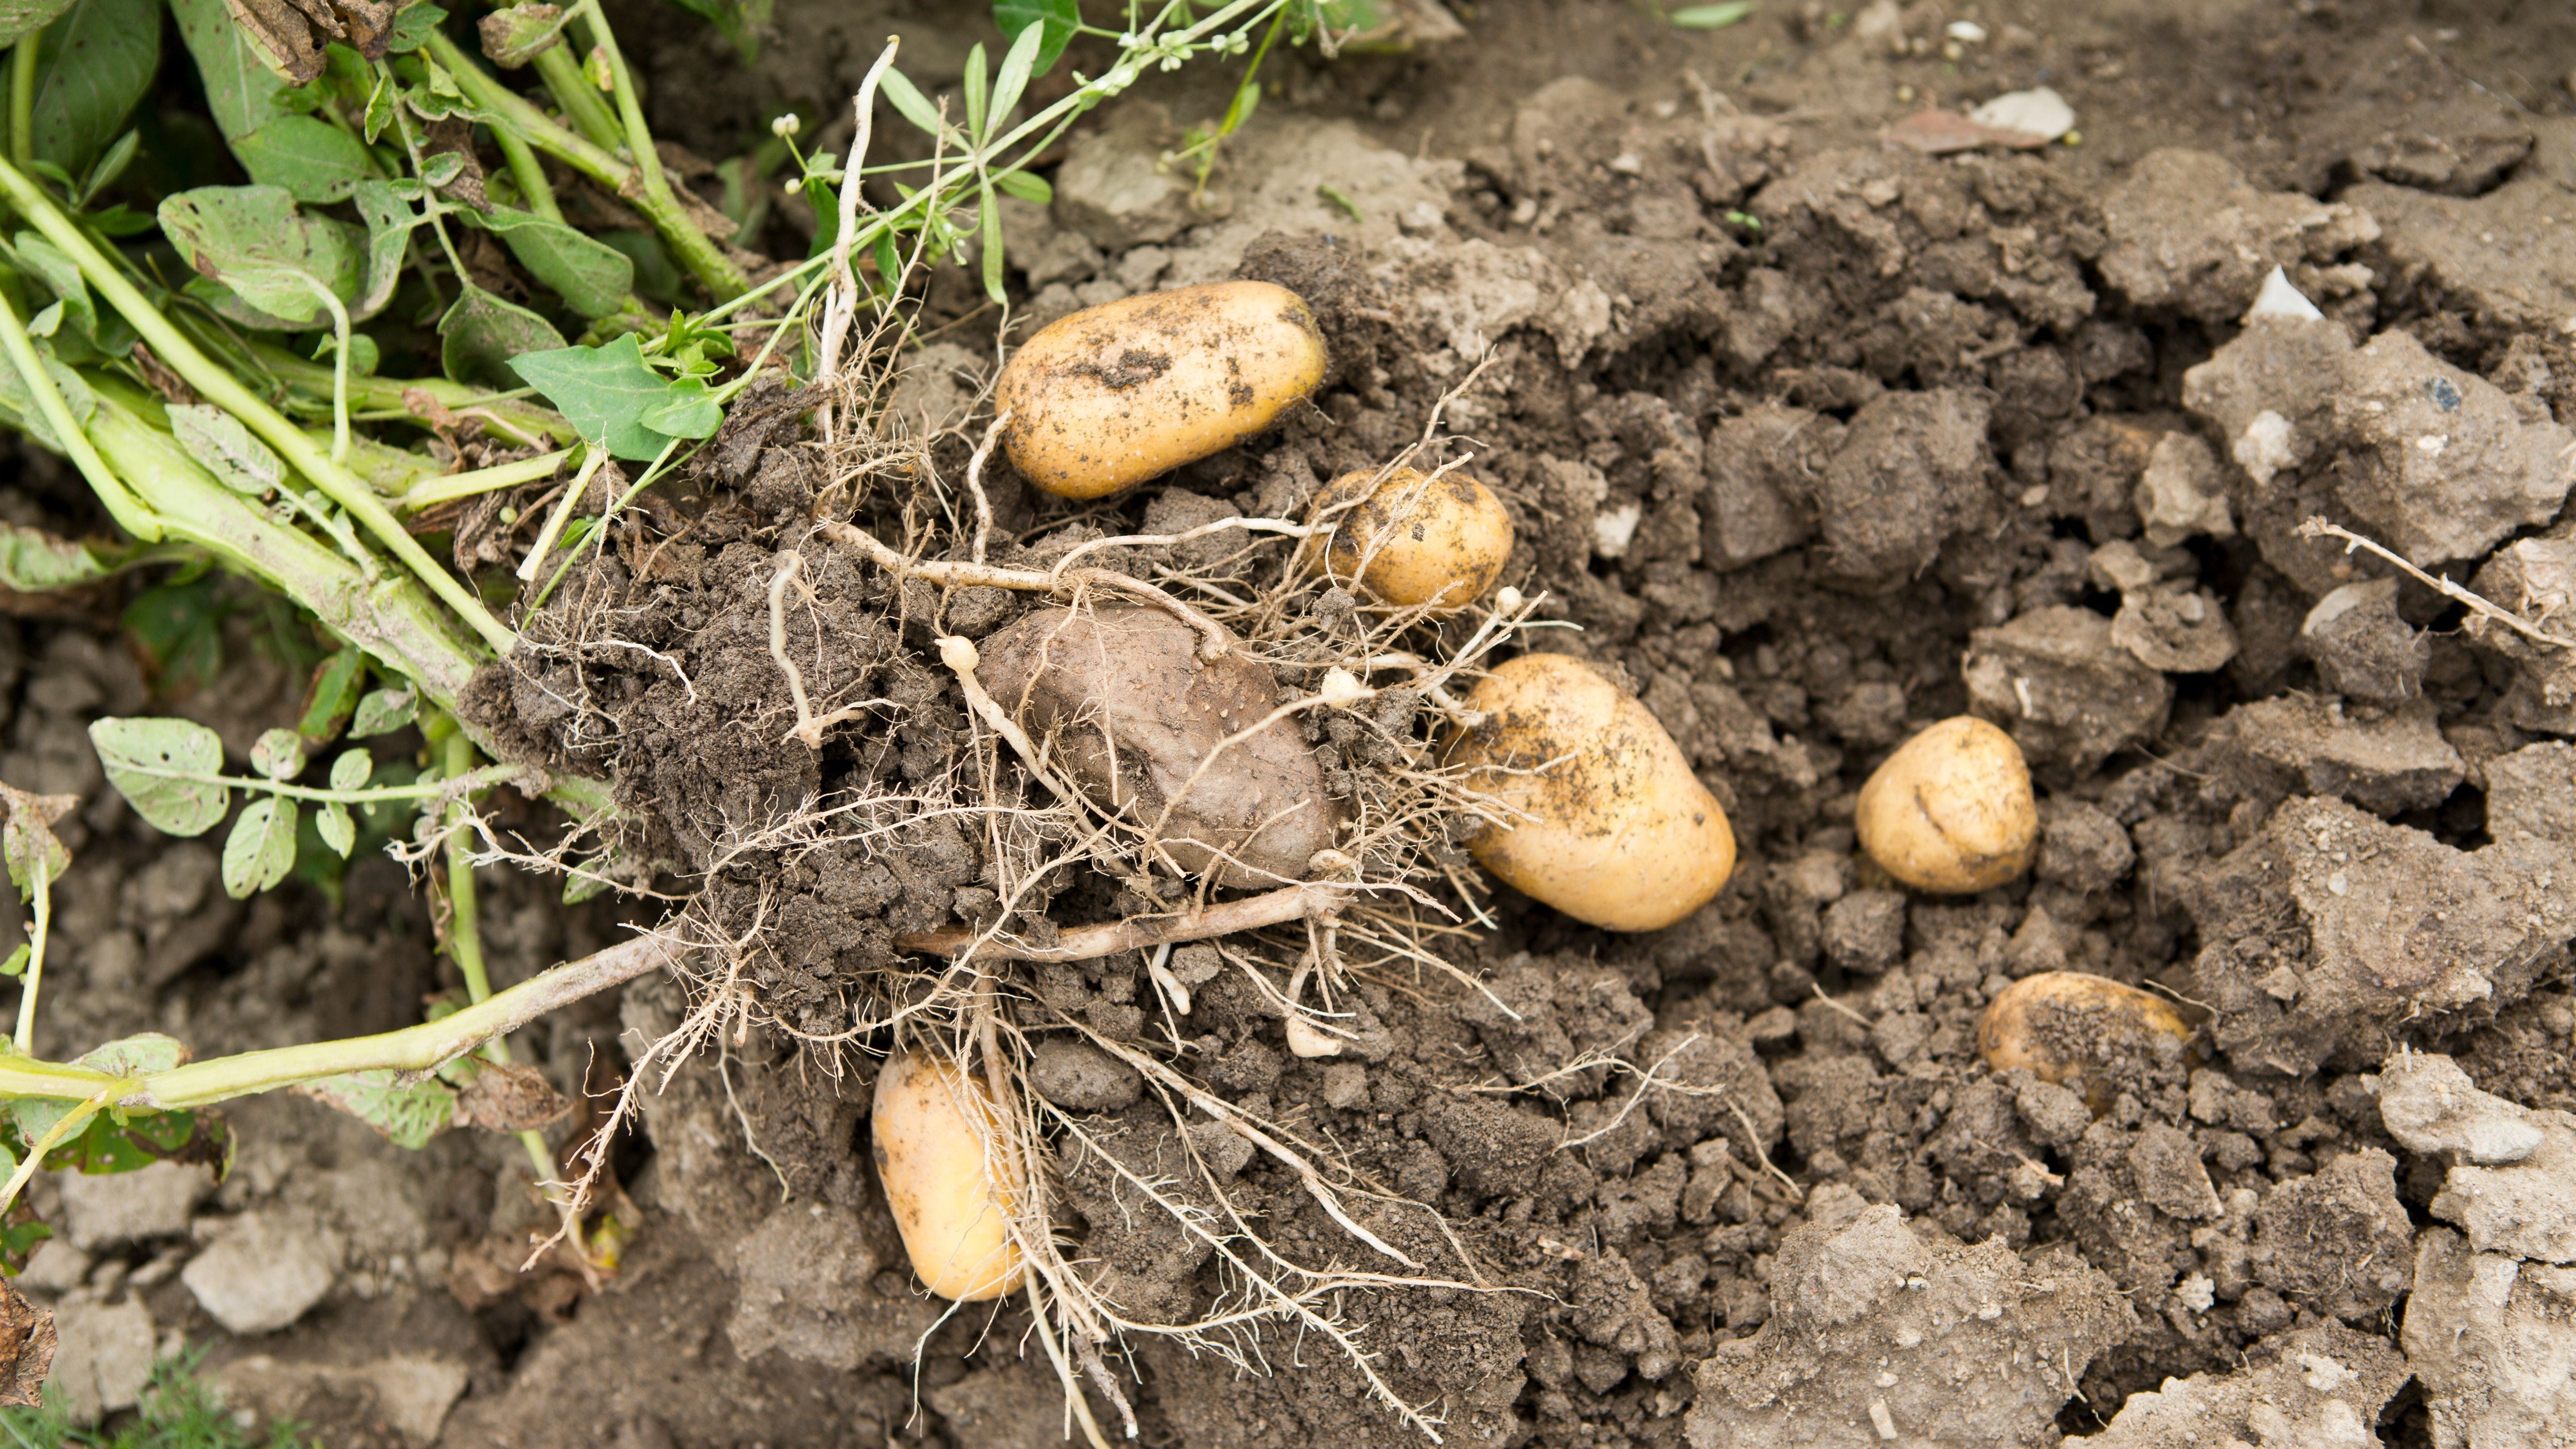 Overview of Potato Pests